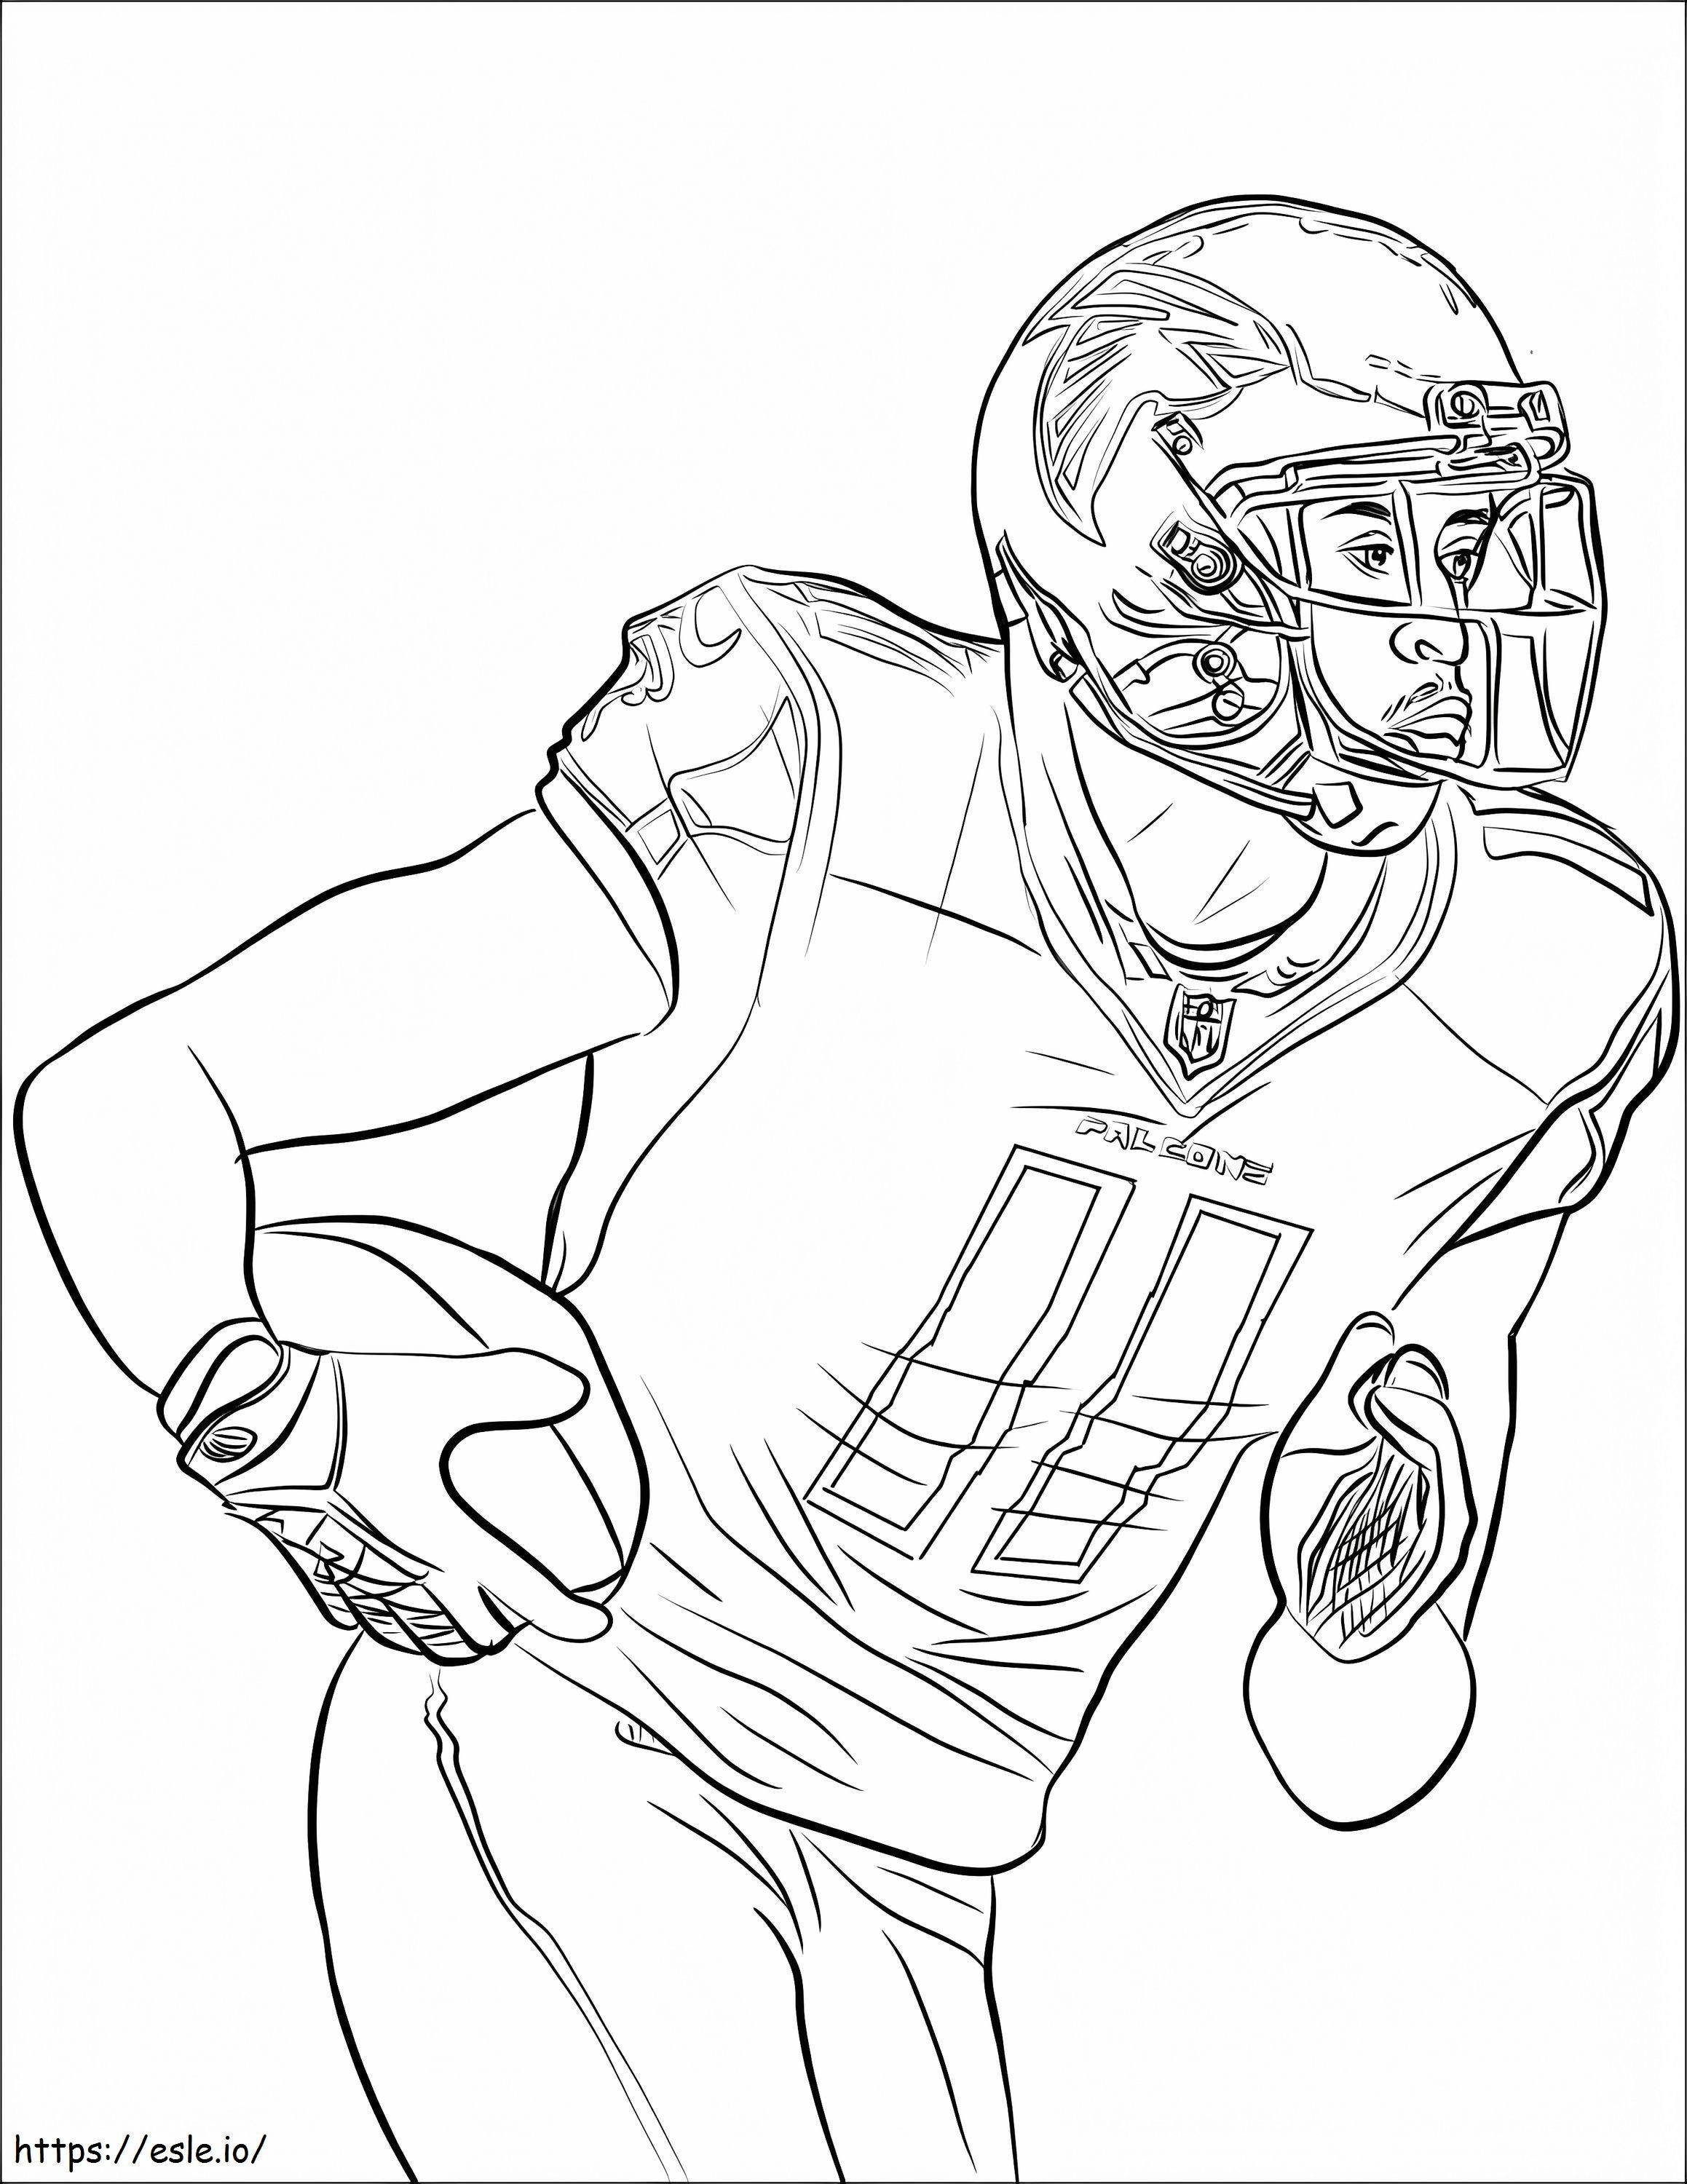 Julio Jones Football Player coloring page